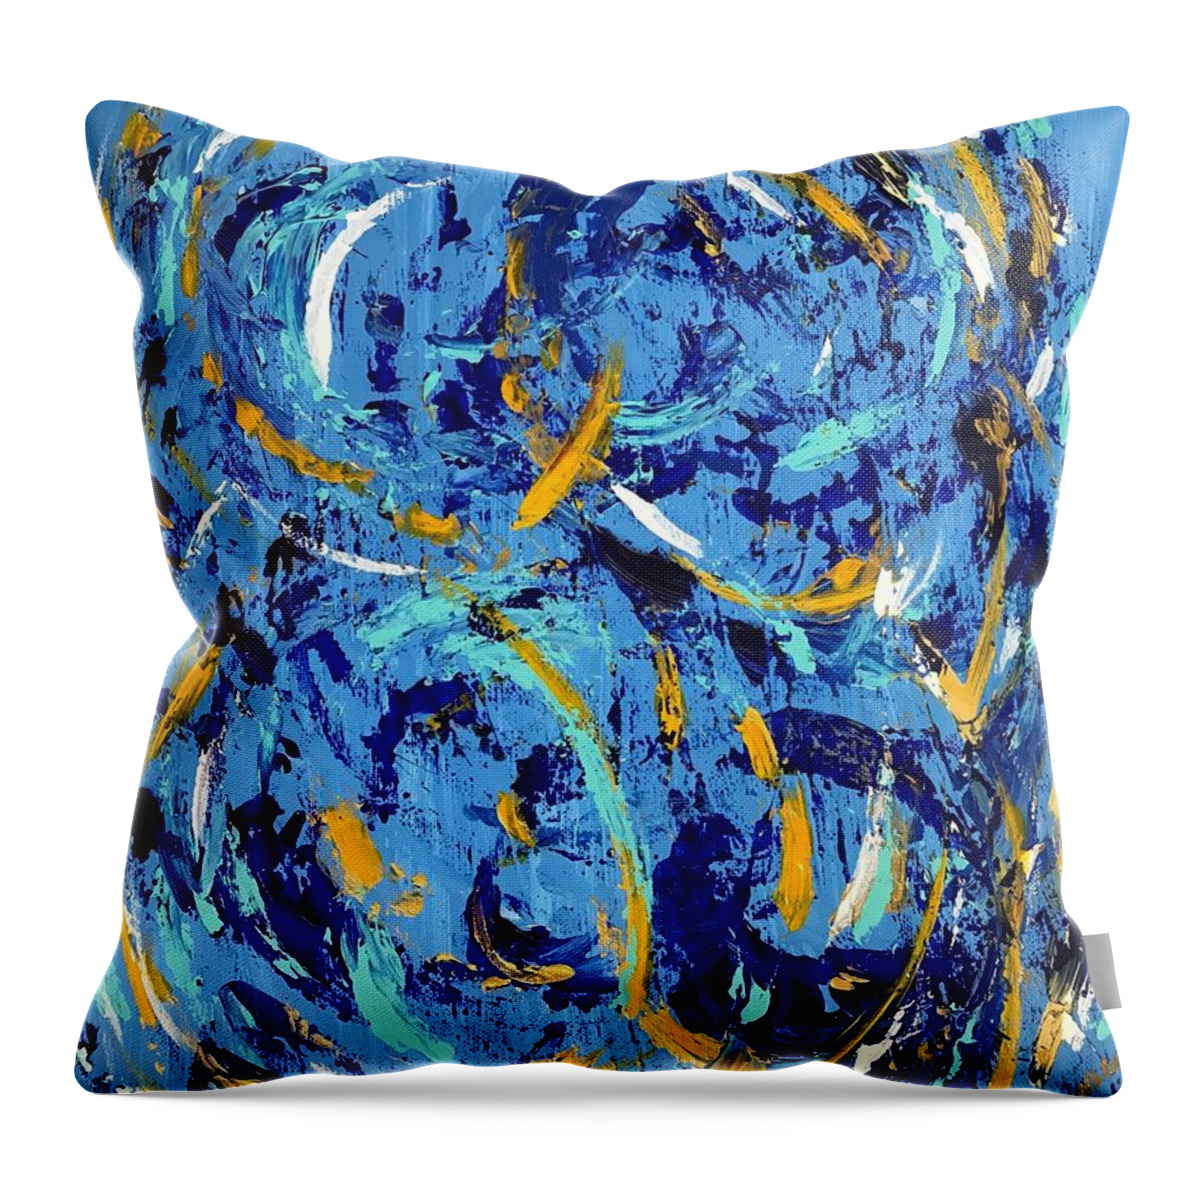 Flow Positivity Blue Blue Fun Summer Throw Pillow featuring the painting Flow by Medge Jaspan